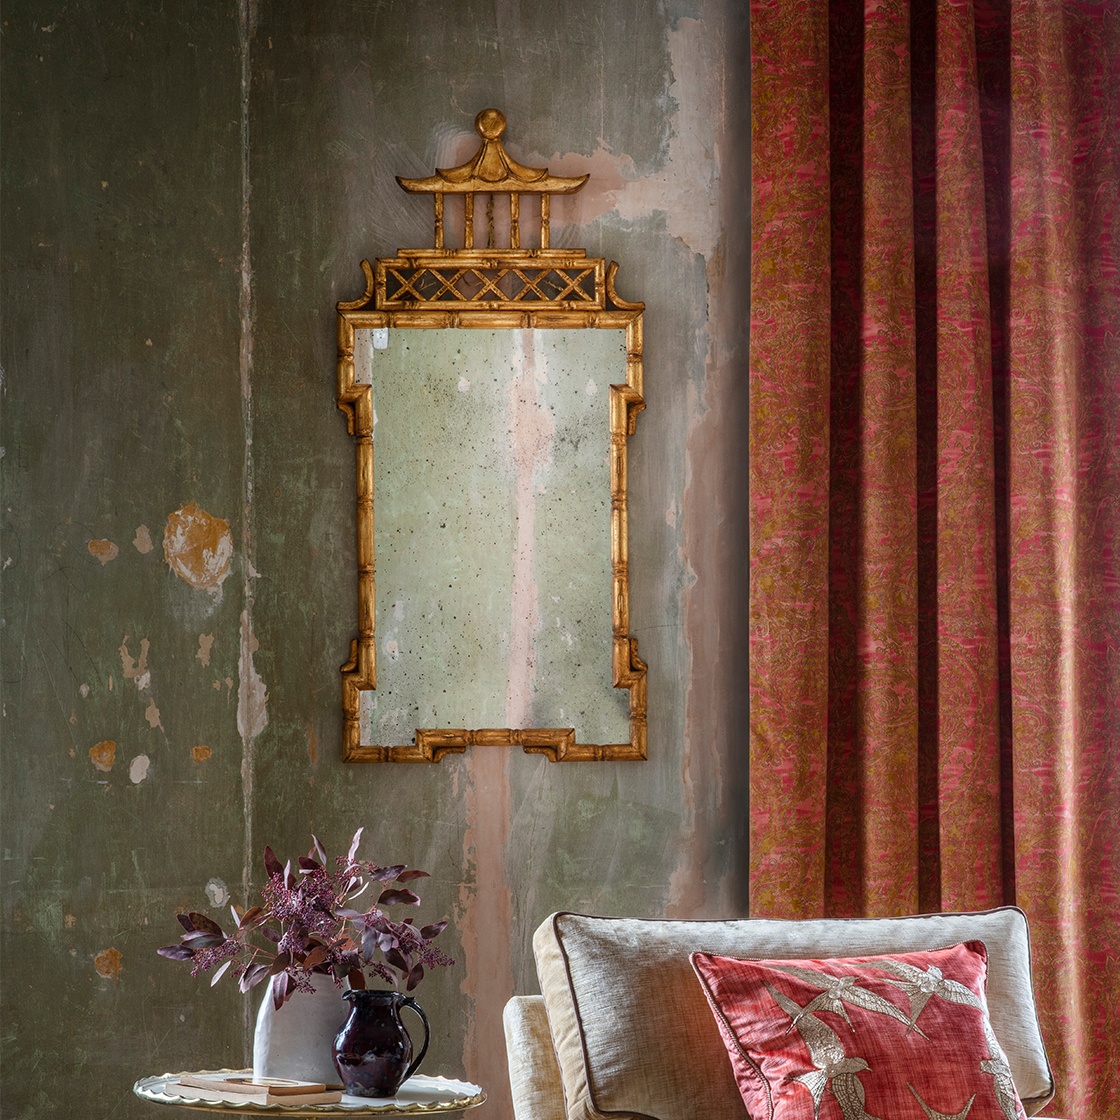 Cathay mirror in Burnt gold with Marlborough chair and Elvira cushion - Beaumont & Fletcher